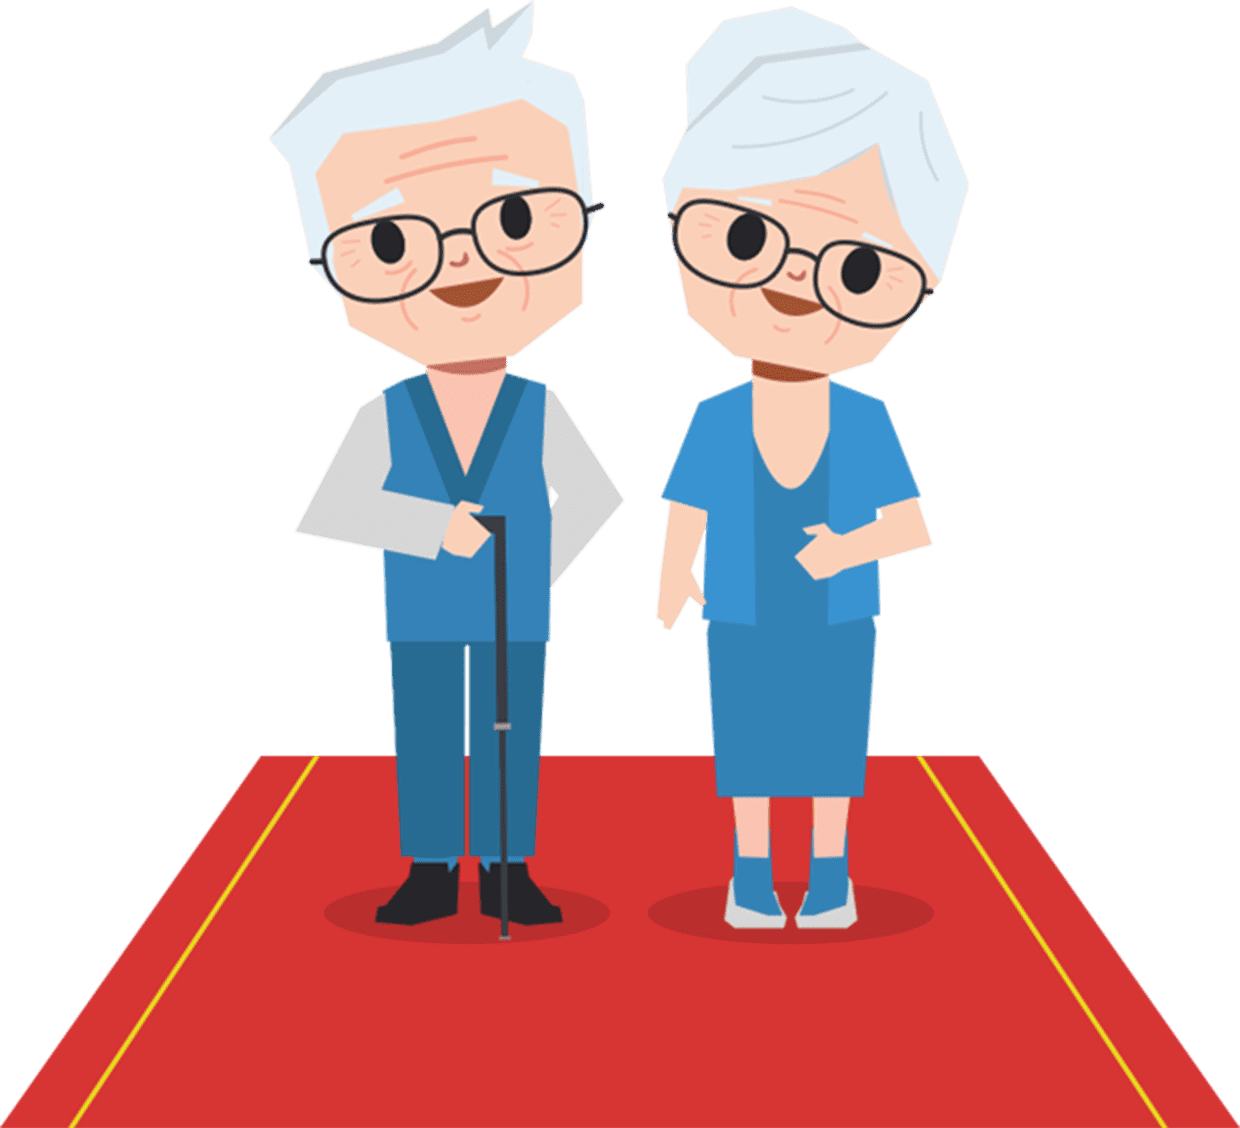 An elderly couple gracefully poses on a red carpet during their senior moving day.